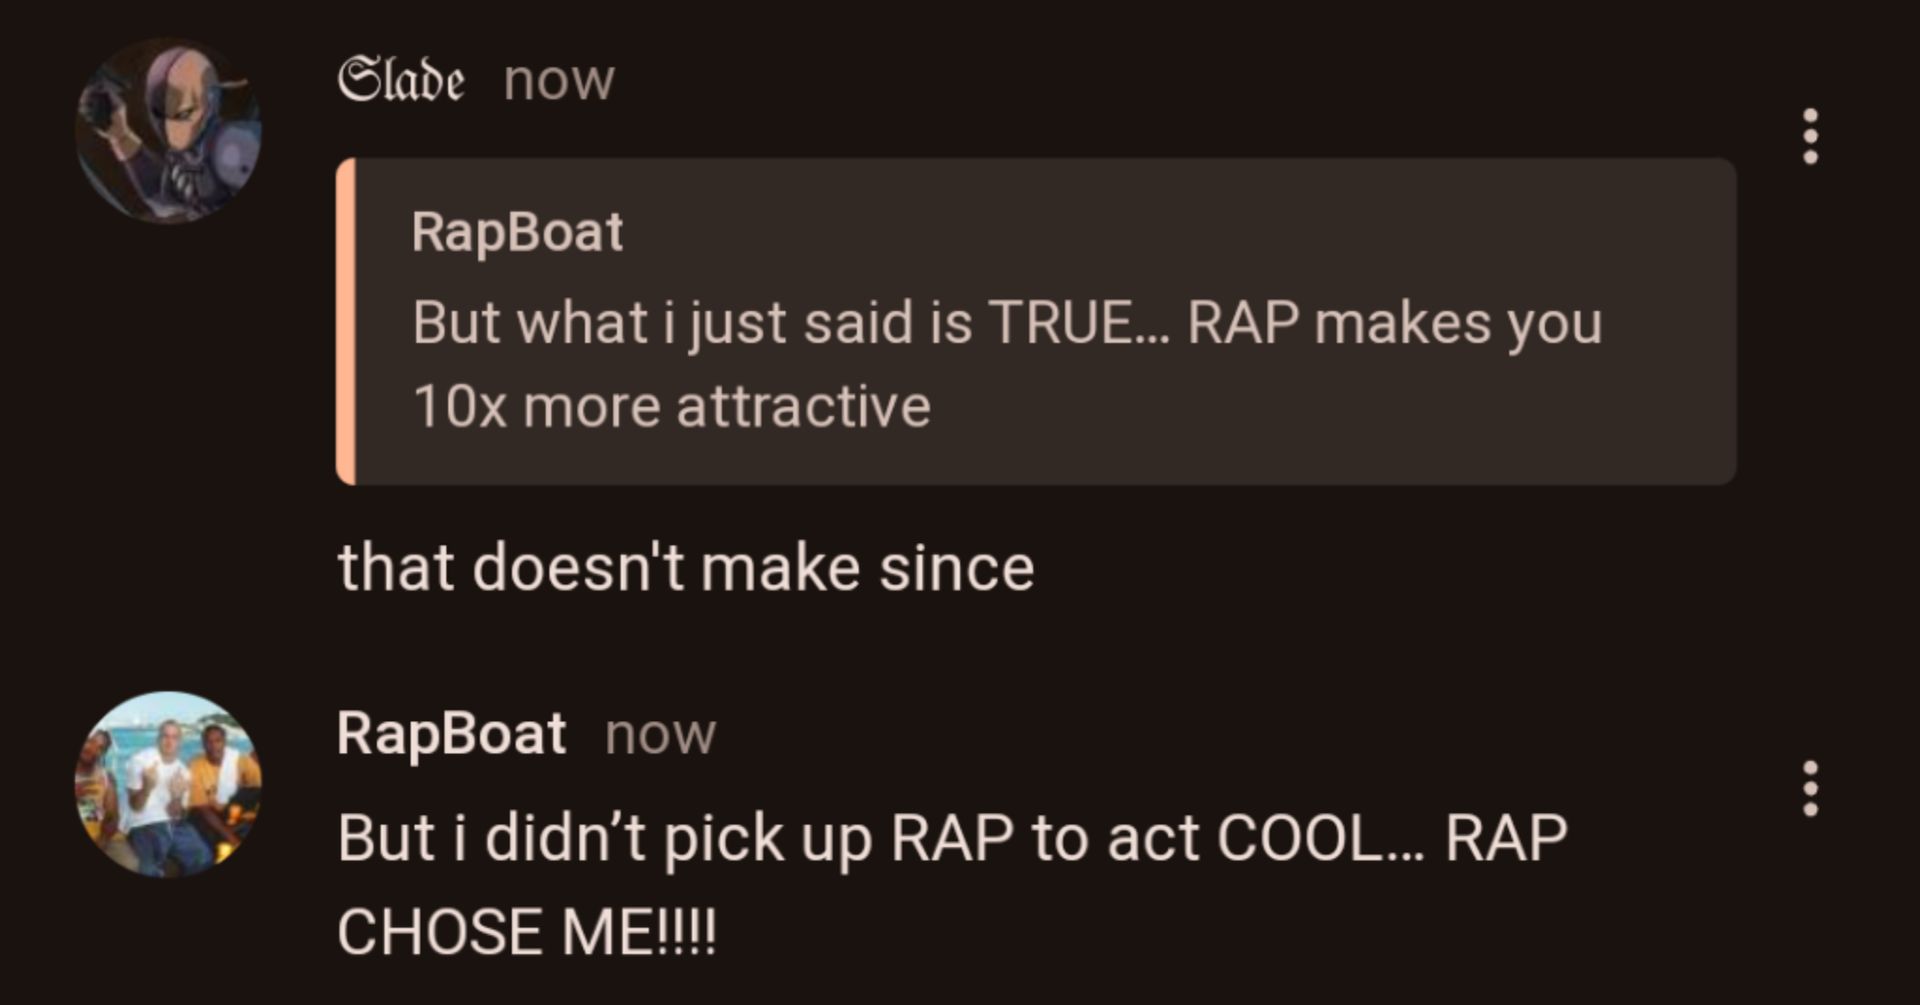 Slade now
RapBoat
But what i just said is TRUE... RAP makes you
10x more attractive
that doesn't make since
RapBoat now
But i didn't pick up RAP to act COOL... RAP
CHOSE ME!!!!